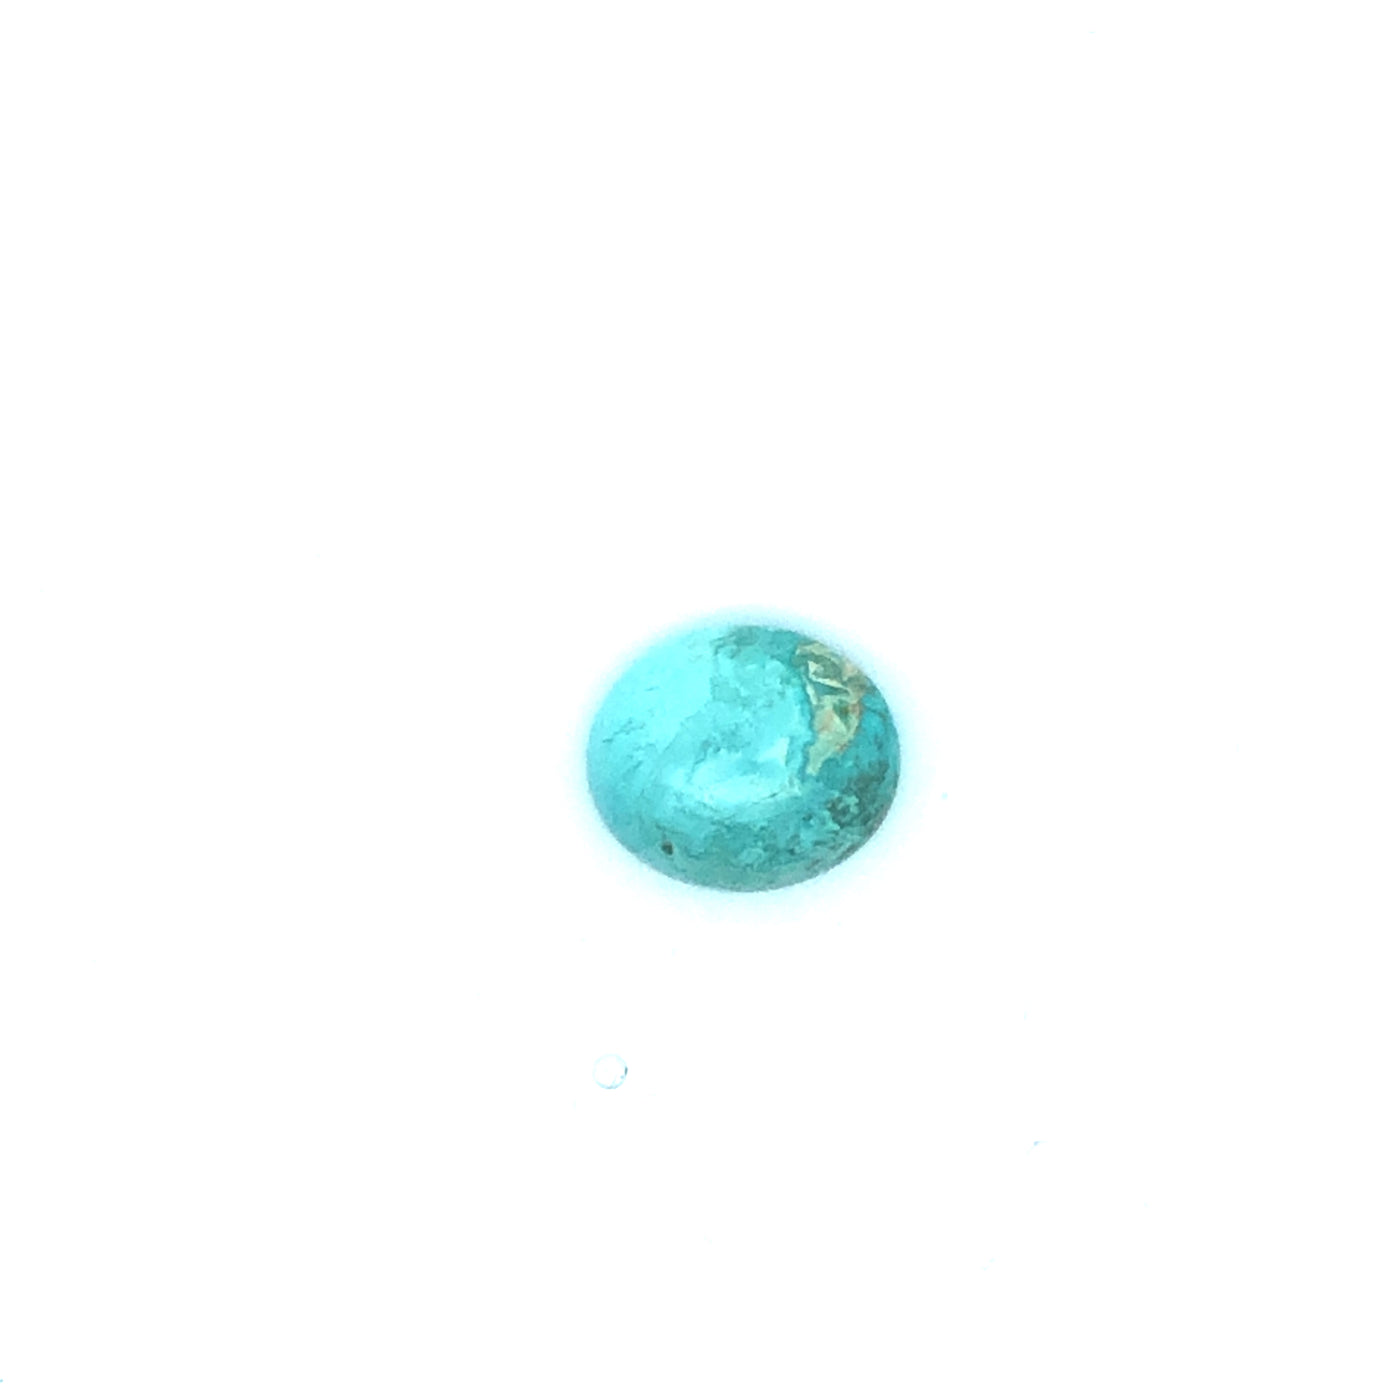 Loose Narooma Turquoise Oval Shaped 5.89Ct Blue With Some White